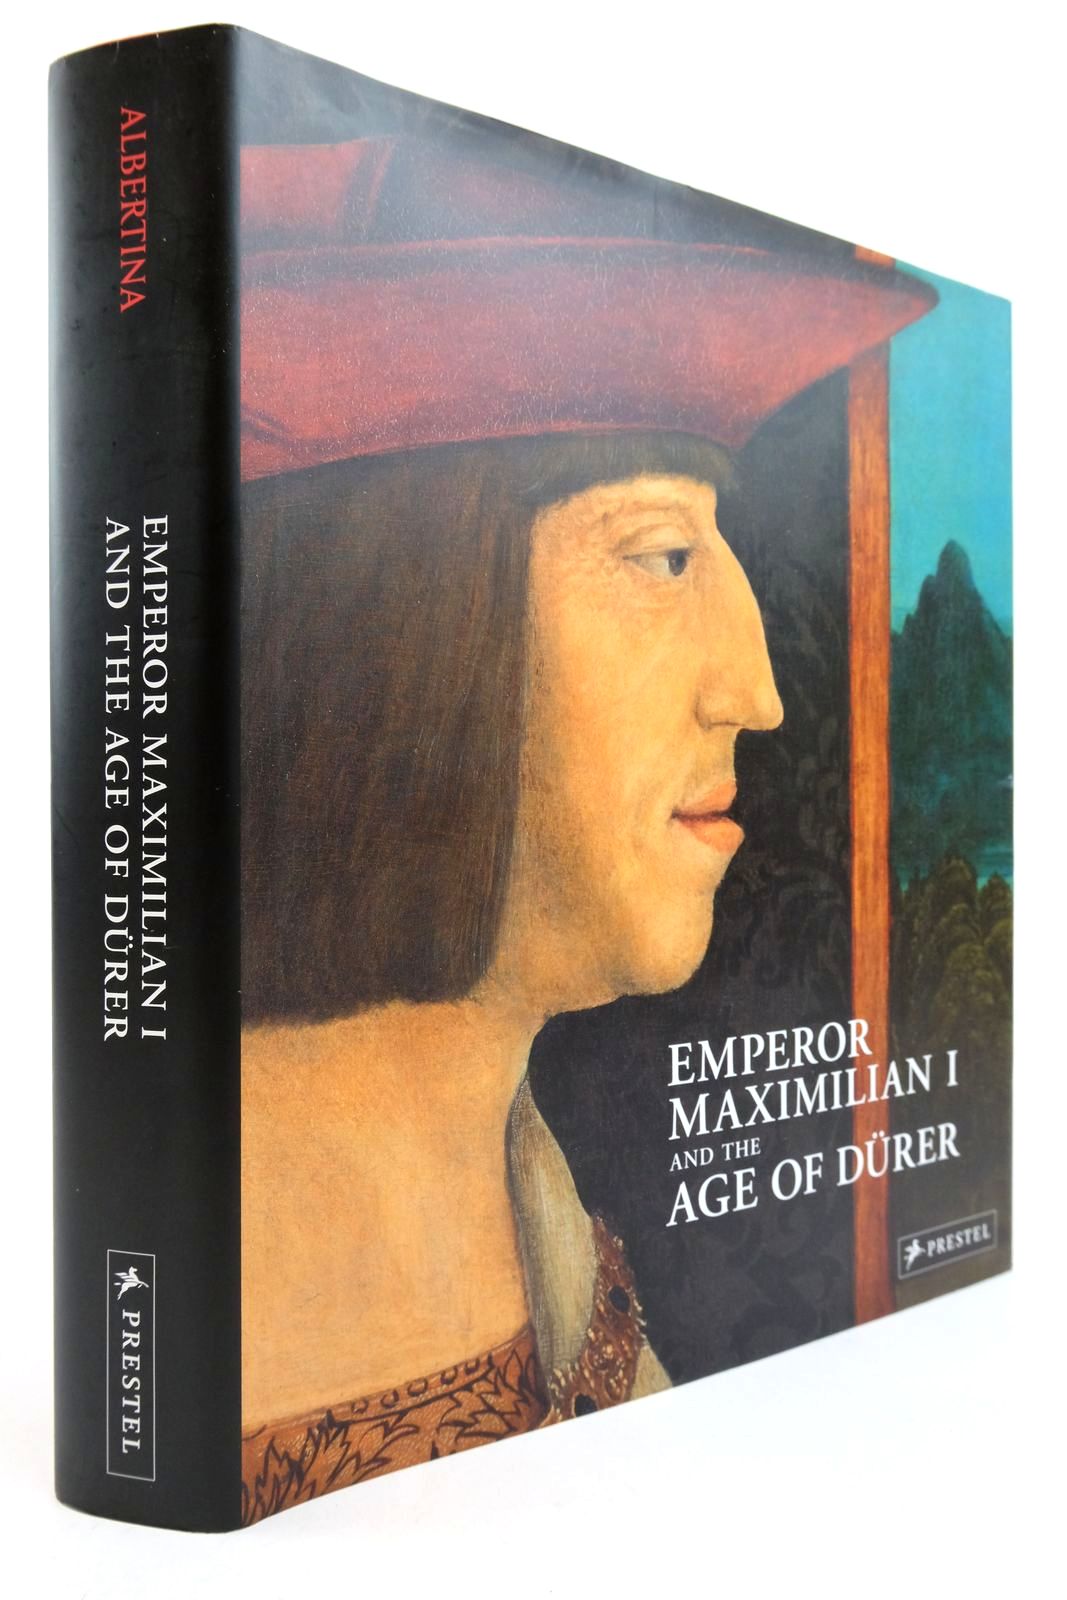 Emperor Maximilian I and The Age of Durer